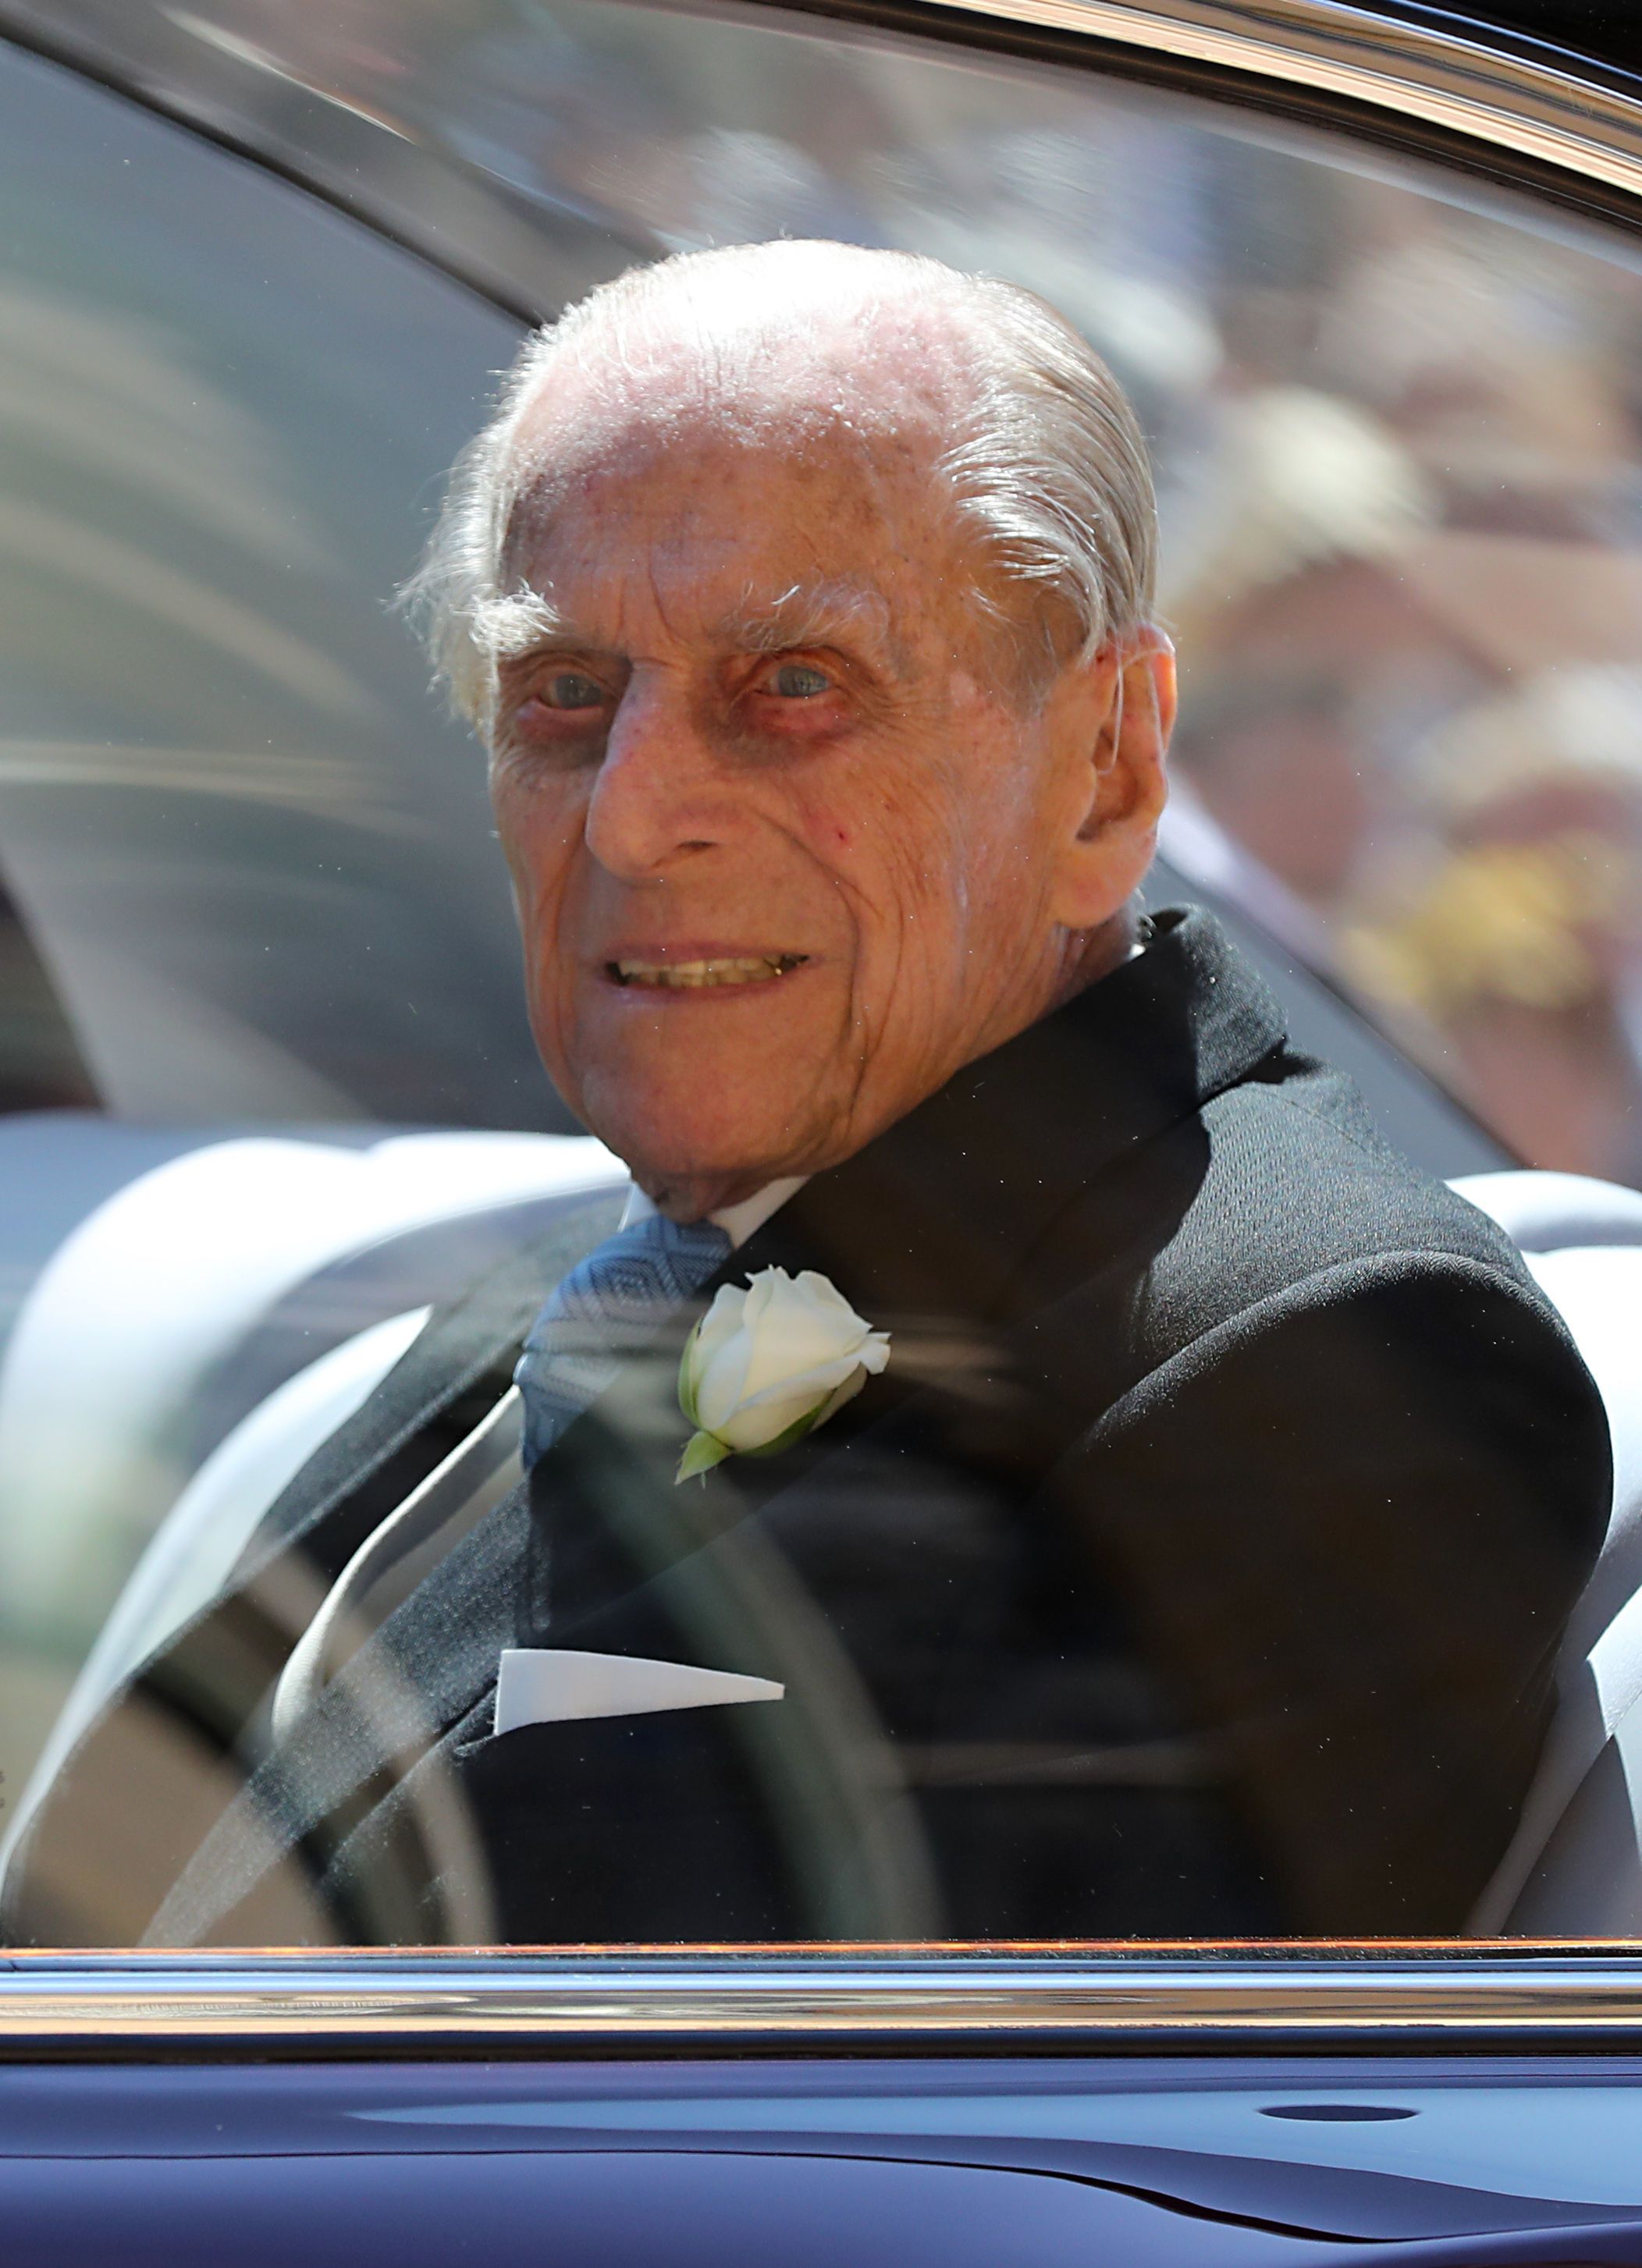 The late Prince Philip, Duke of Edinburgh, leaving St George's Chapel at Windsor Castle after the wedding of Prince Harry to Meghan Markle in Windsor, England | Photo: Gareth Fuller - WPA Pool/Getty Images